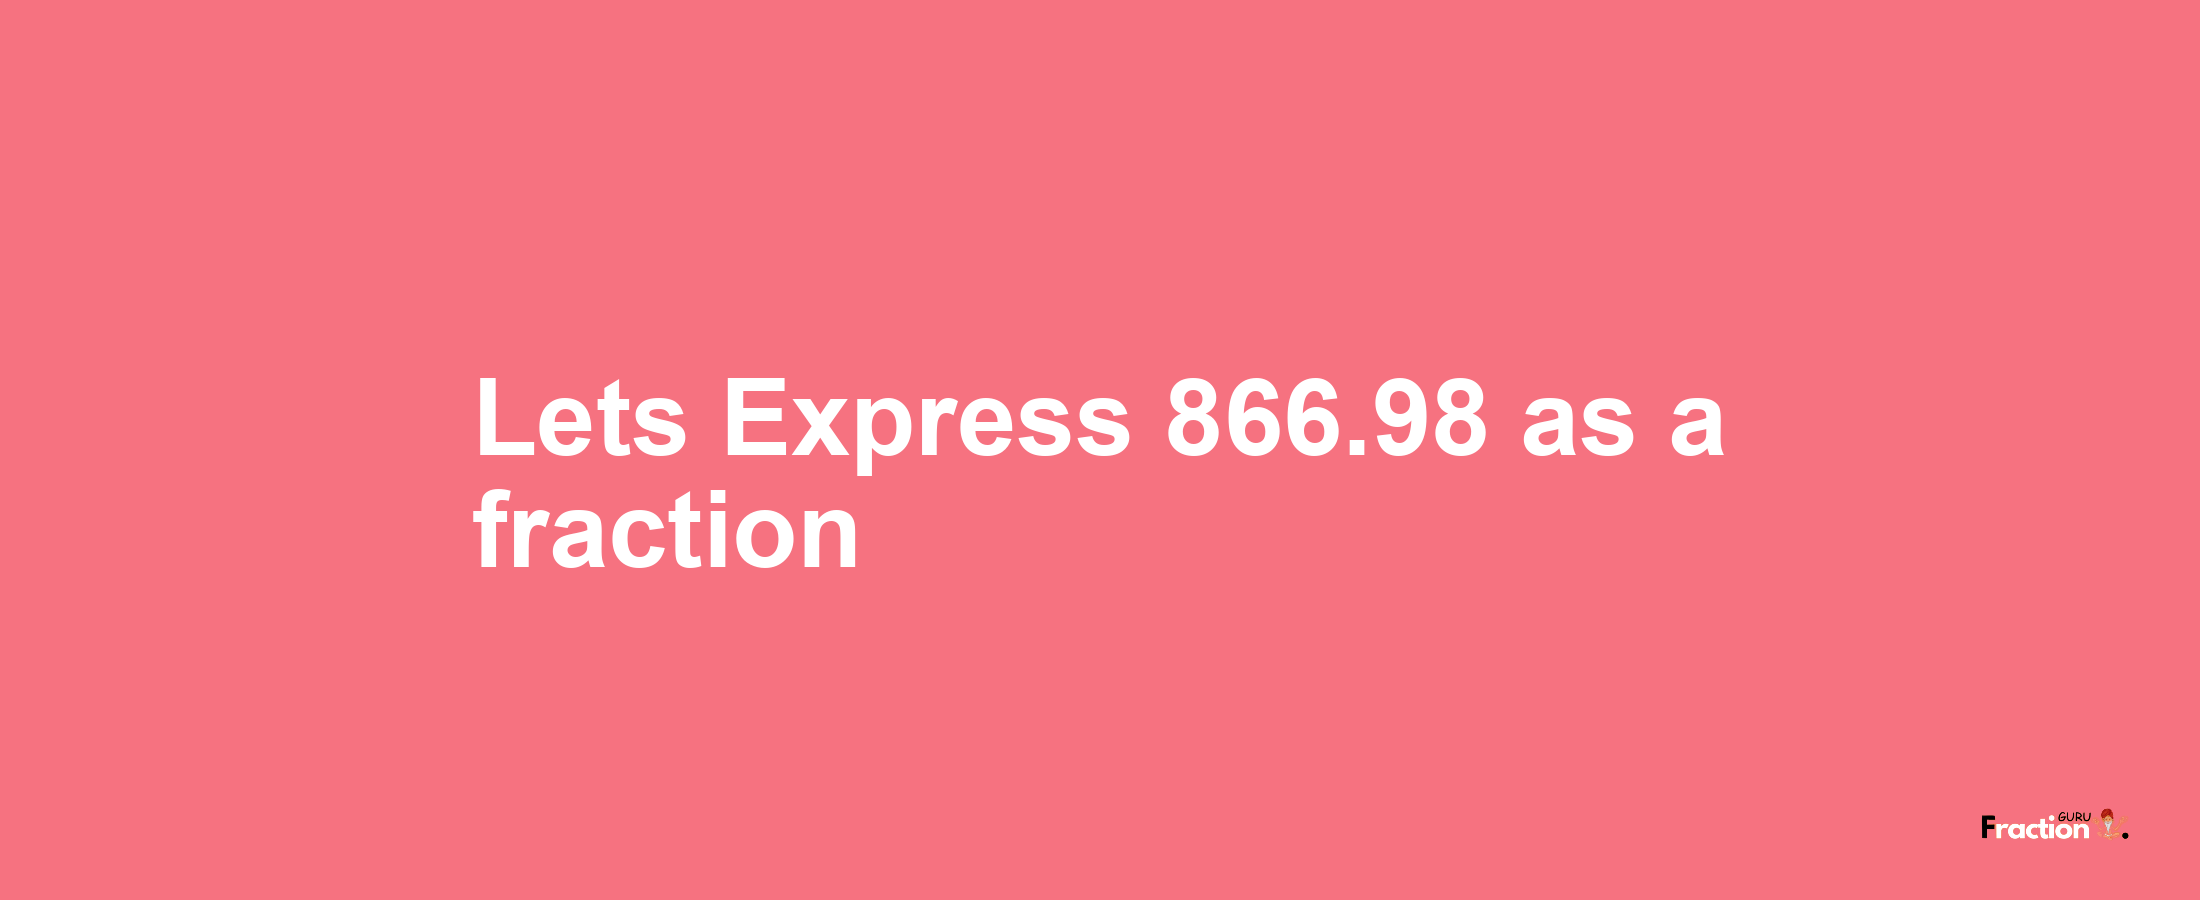 Lets Express 866.98 as afraction